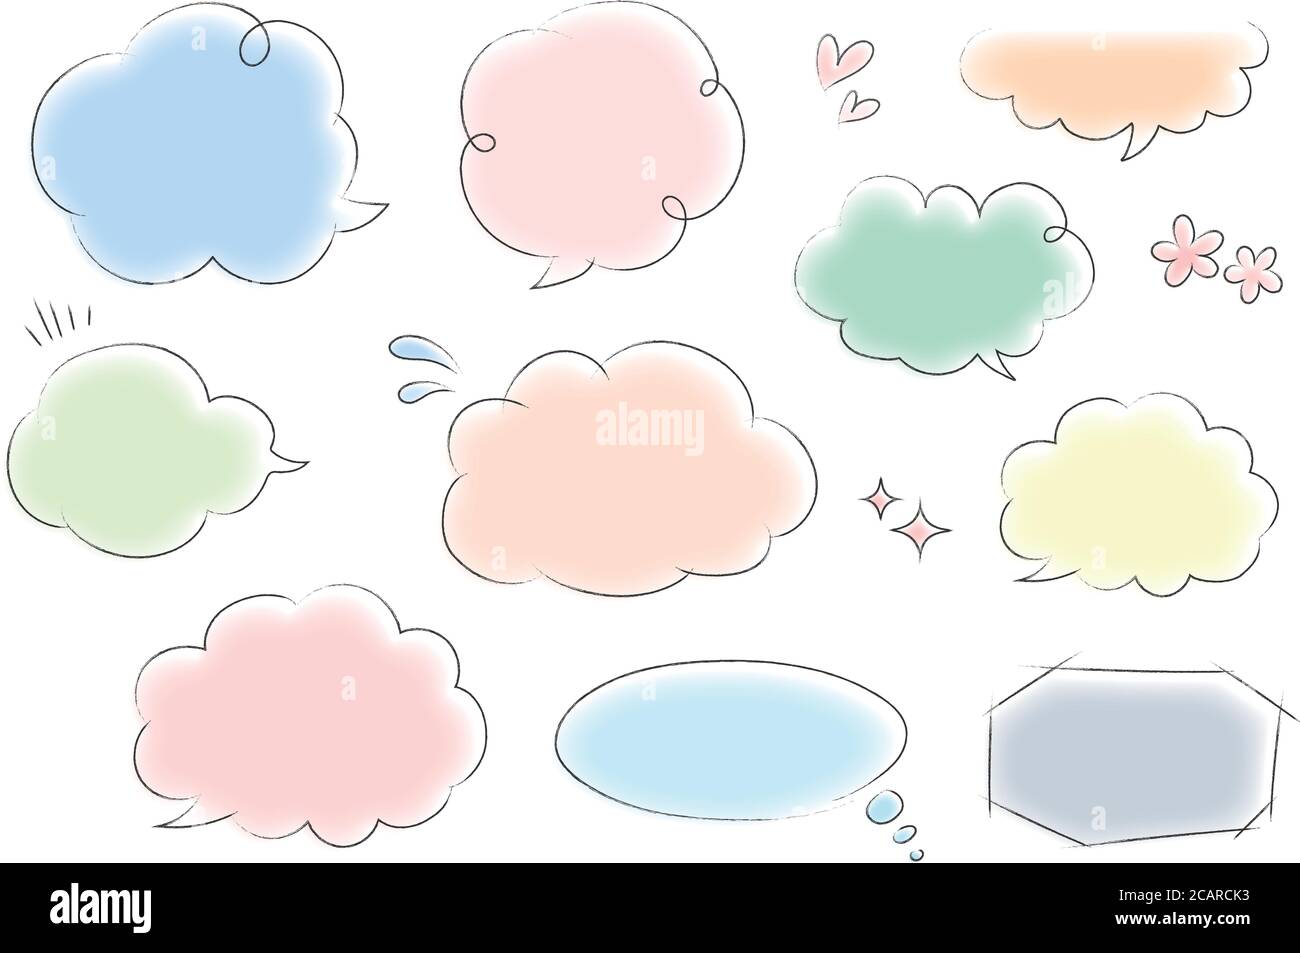 Hand drawn set of colorful speech bubbles. Vector illustration isolated on white background. Stock Vector